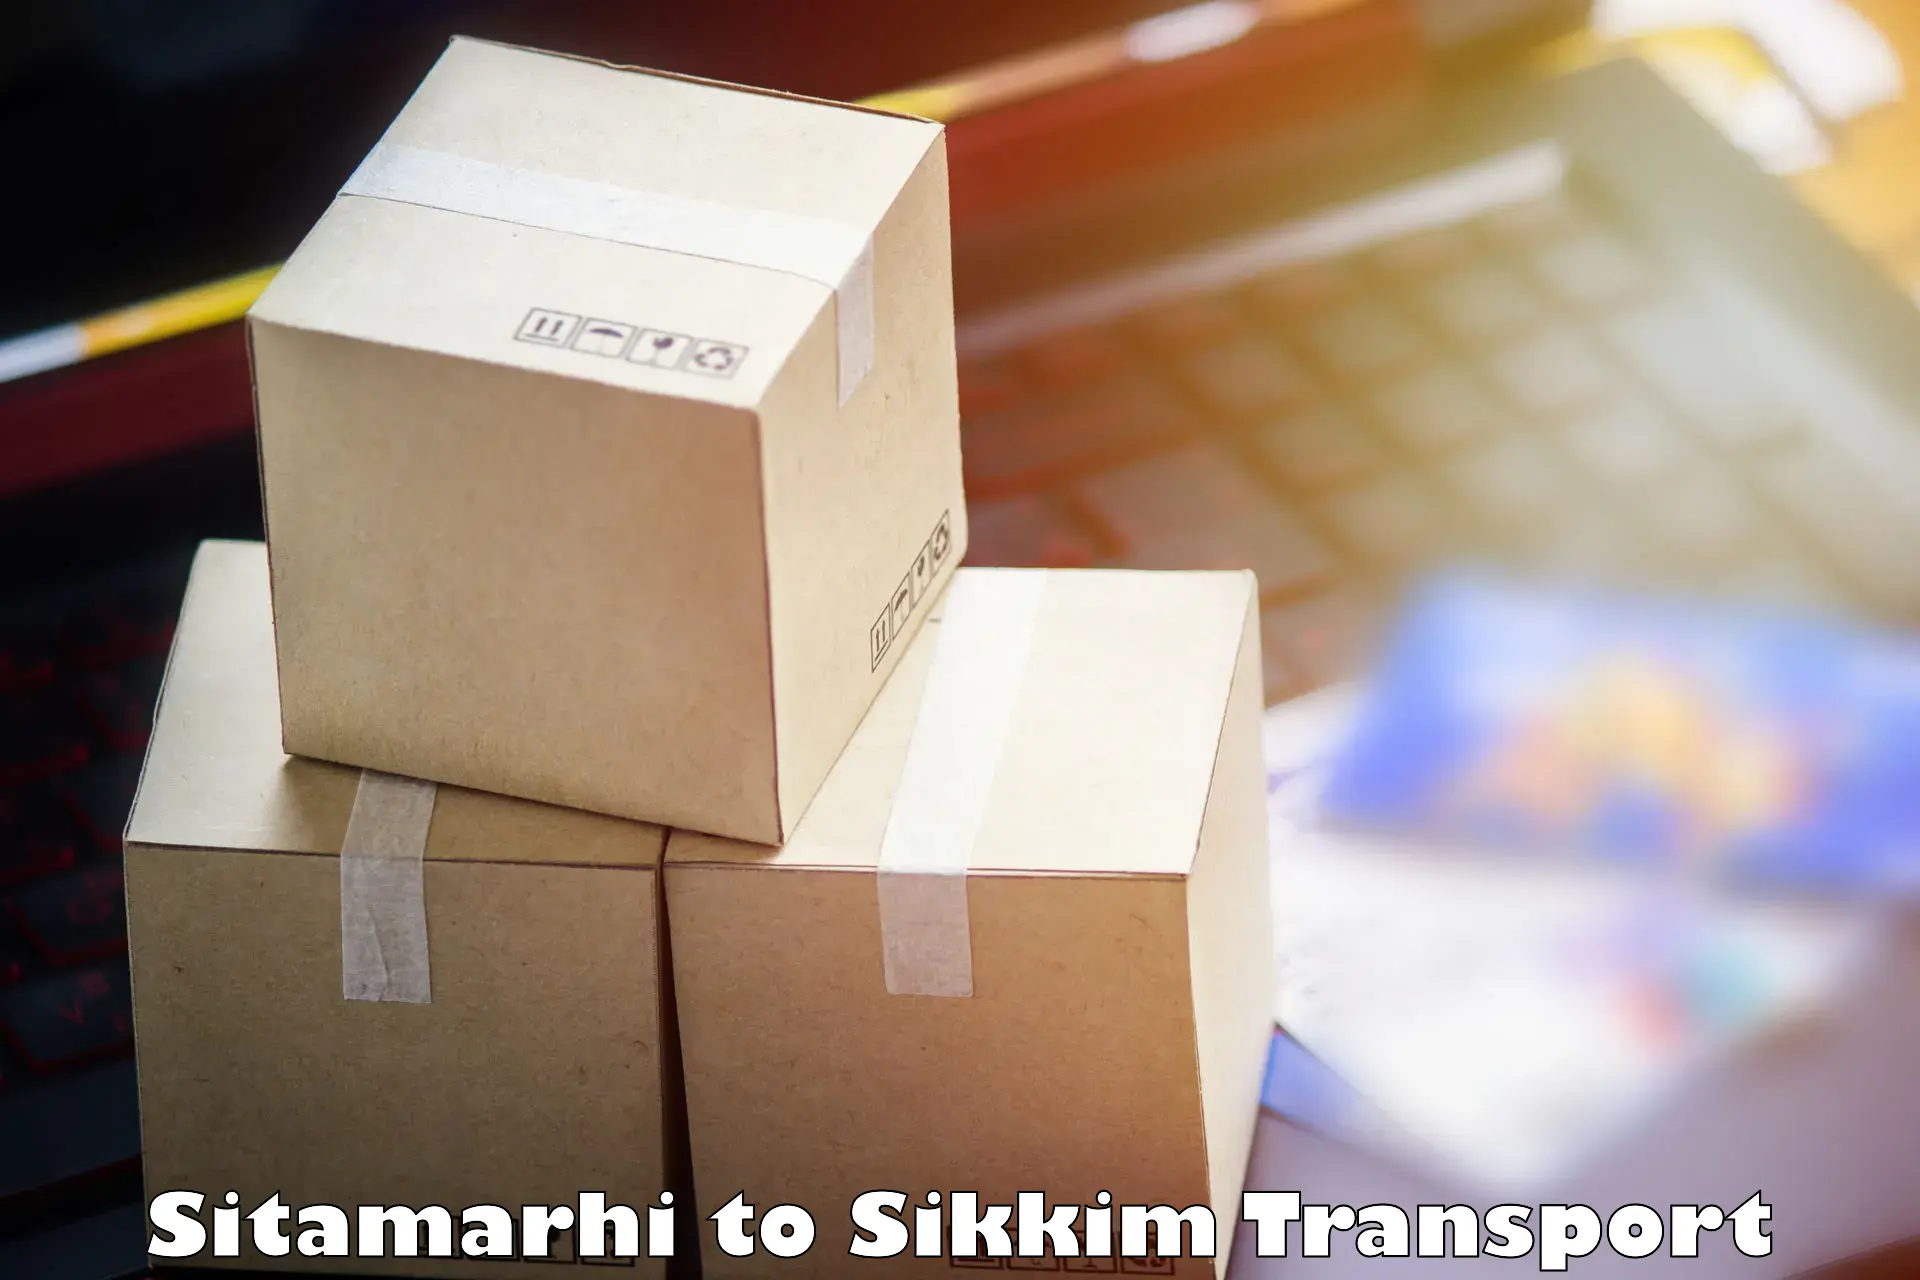 Container transport service Sitamarhi to East Sikkim